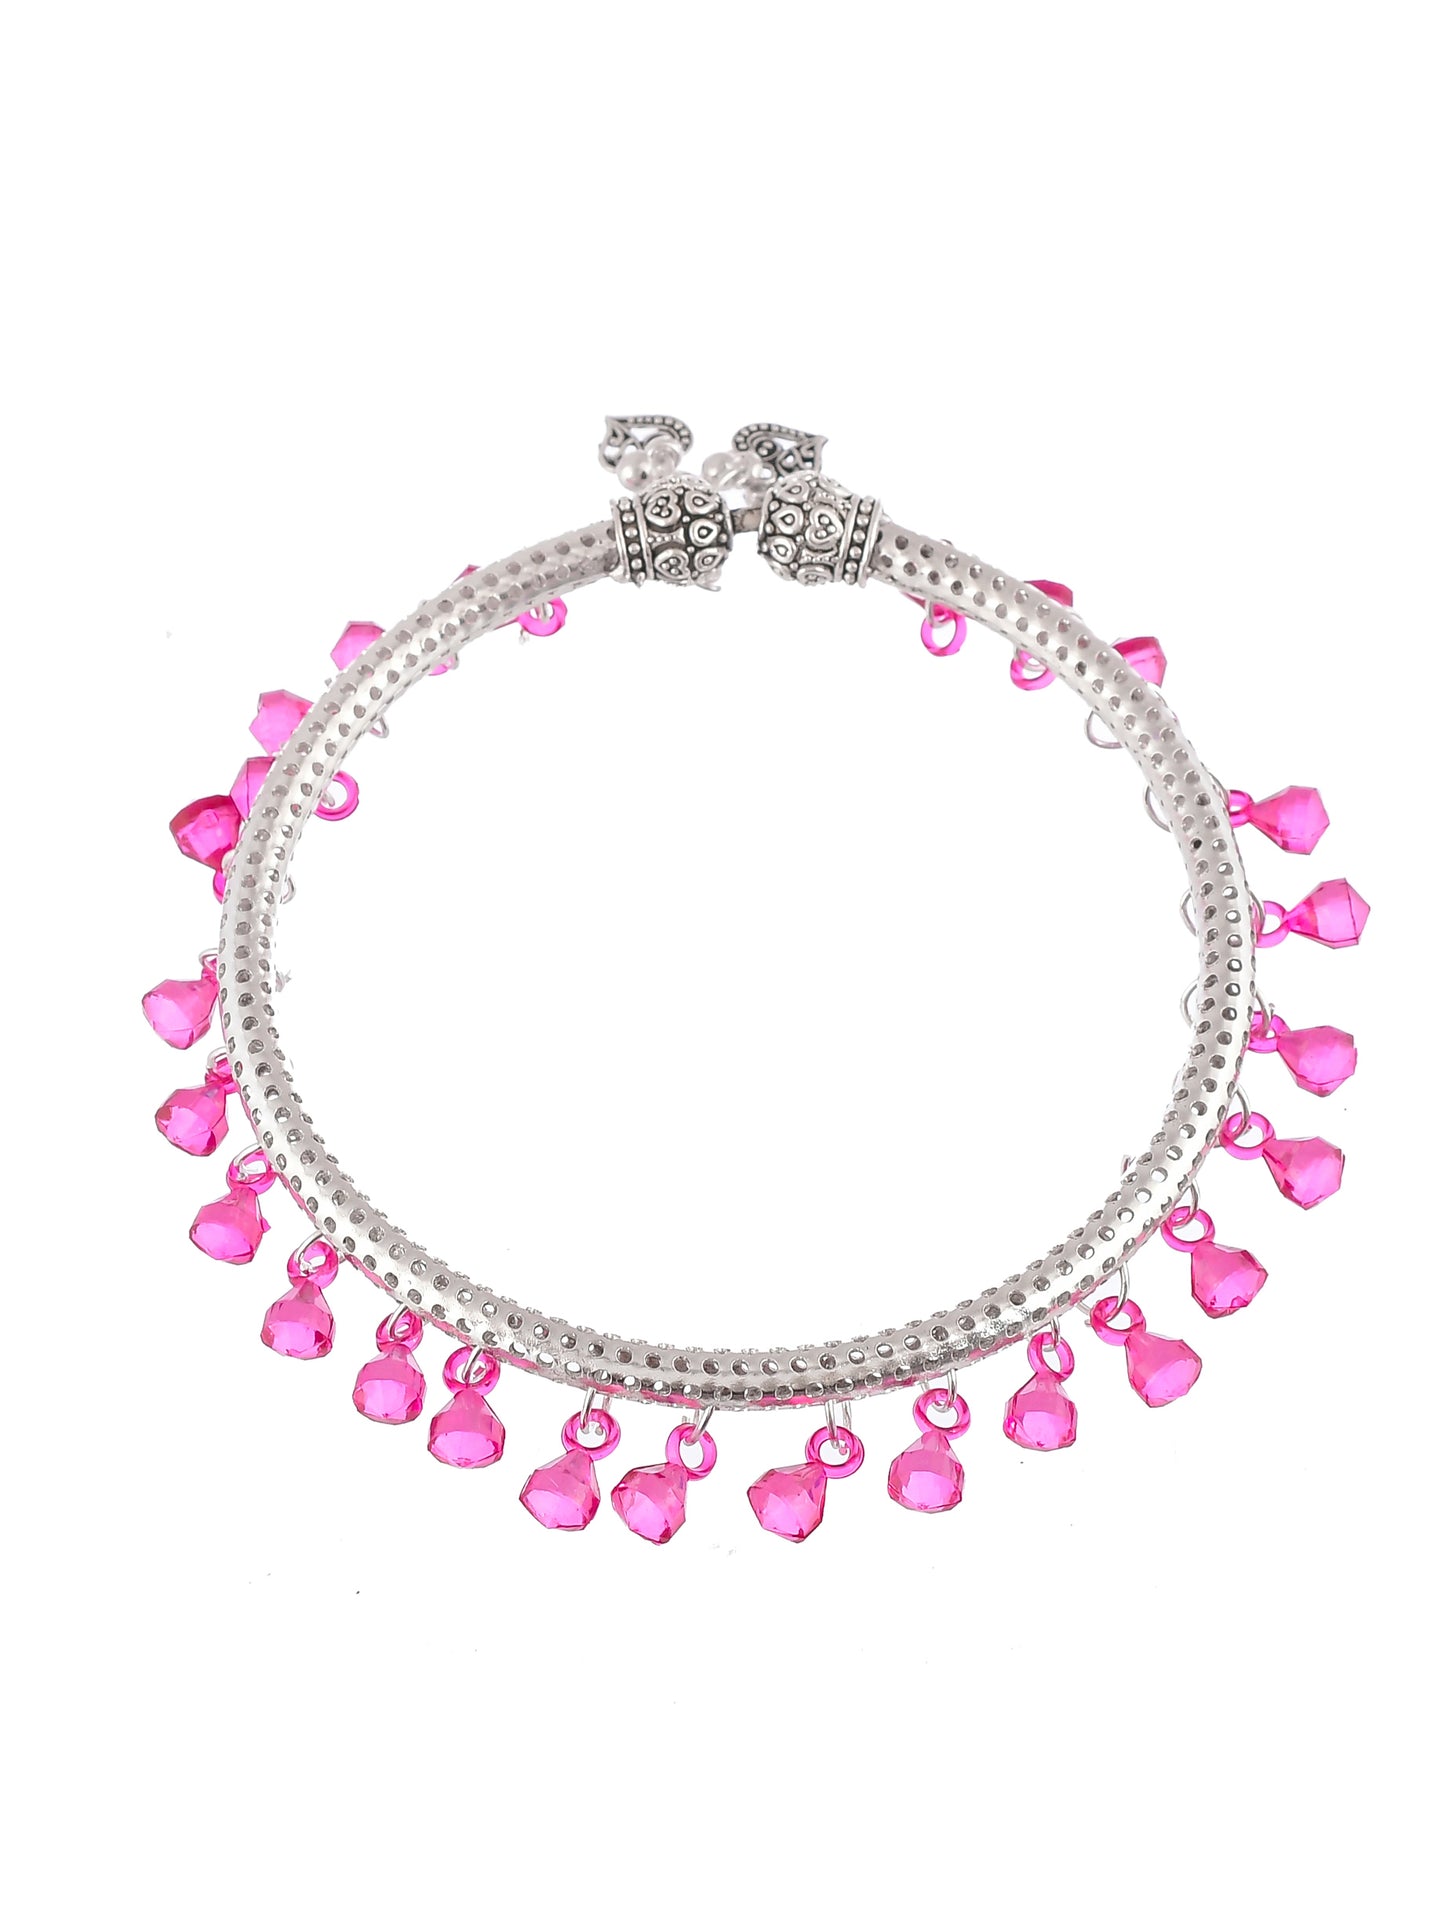 Drop beads Silver plated kada anklet